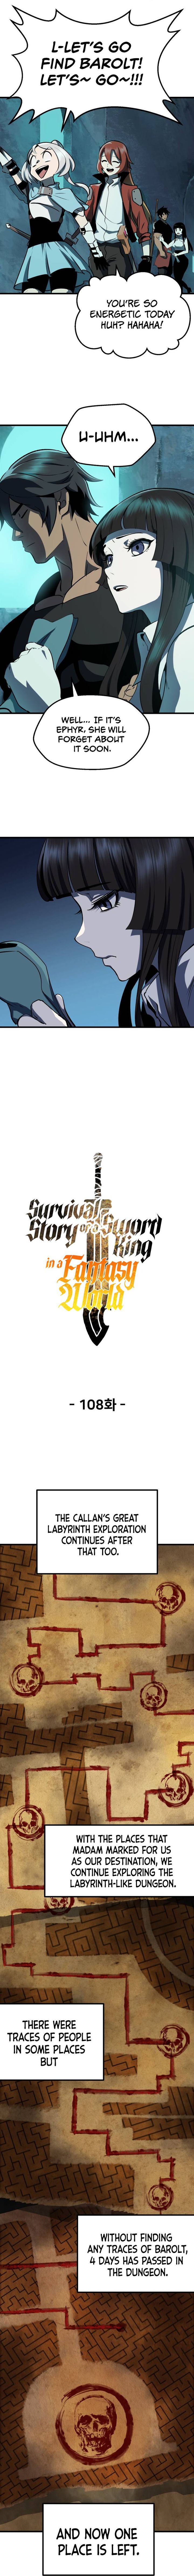 Survival Story Of A Sword King In A Fantasy World 108 6